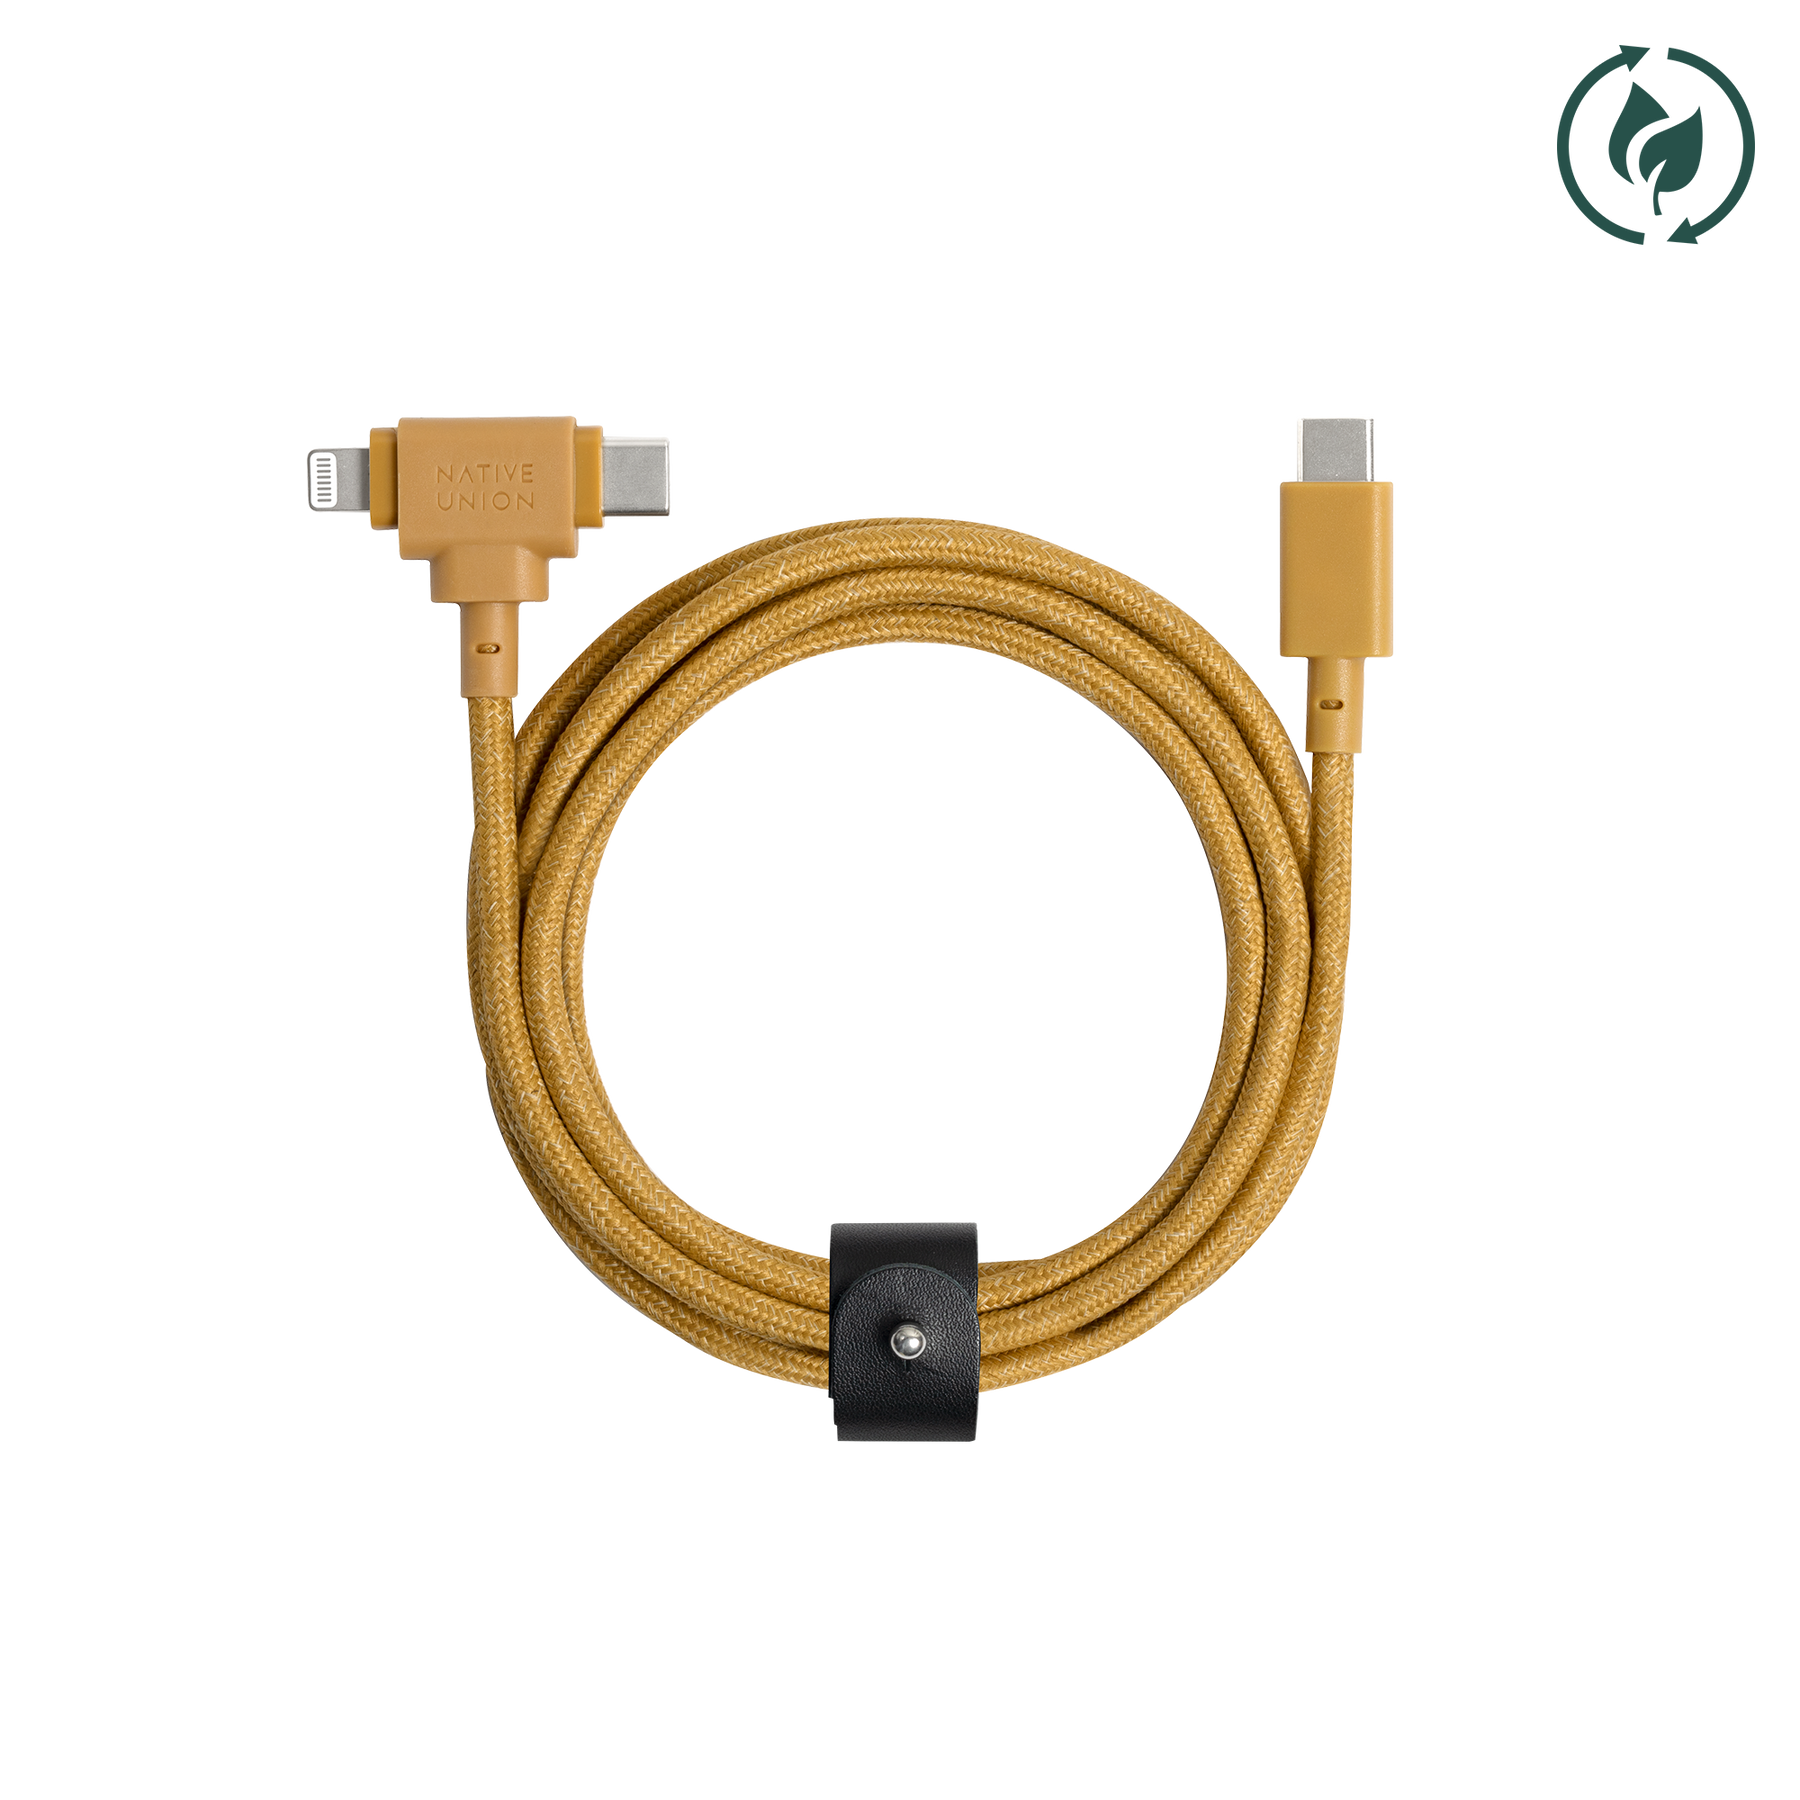 Cables - Charging Essentials - iPhone Accessories - Apple